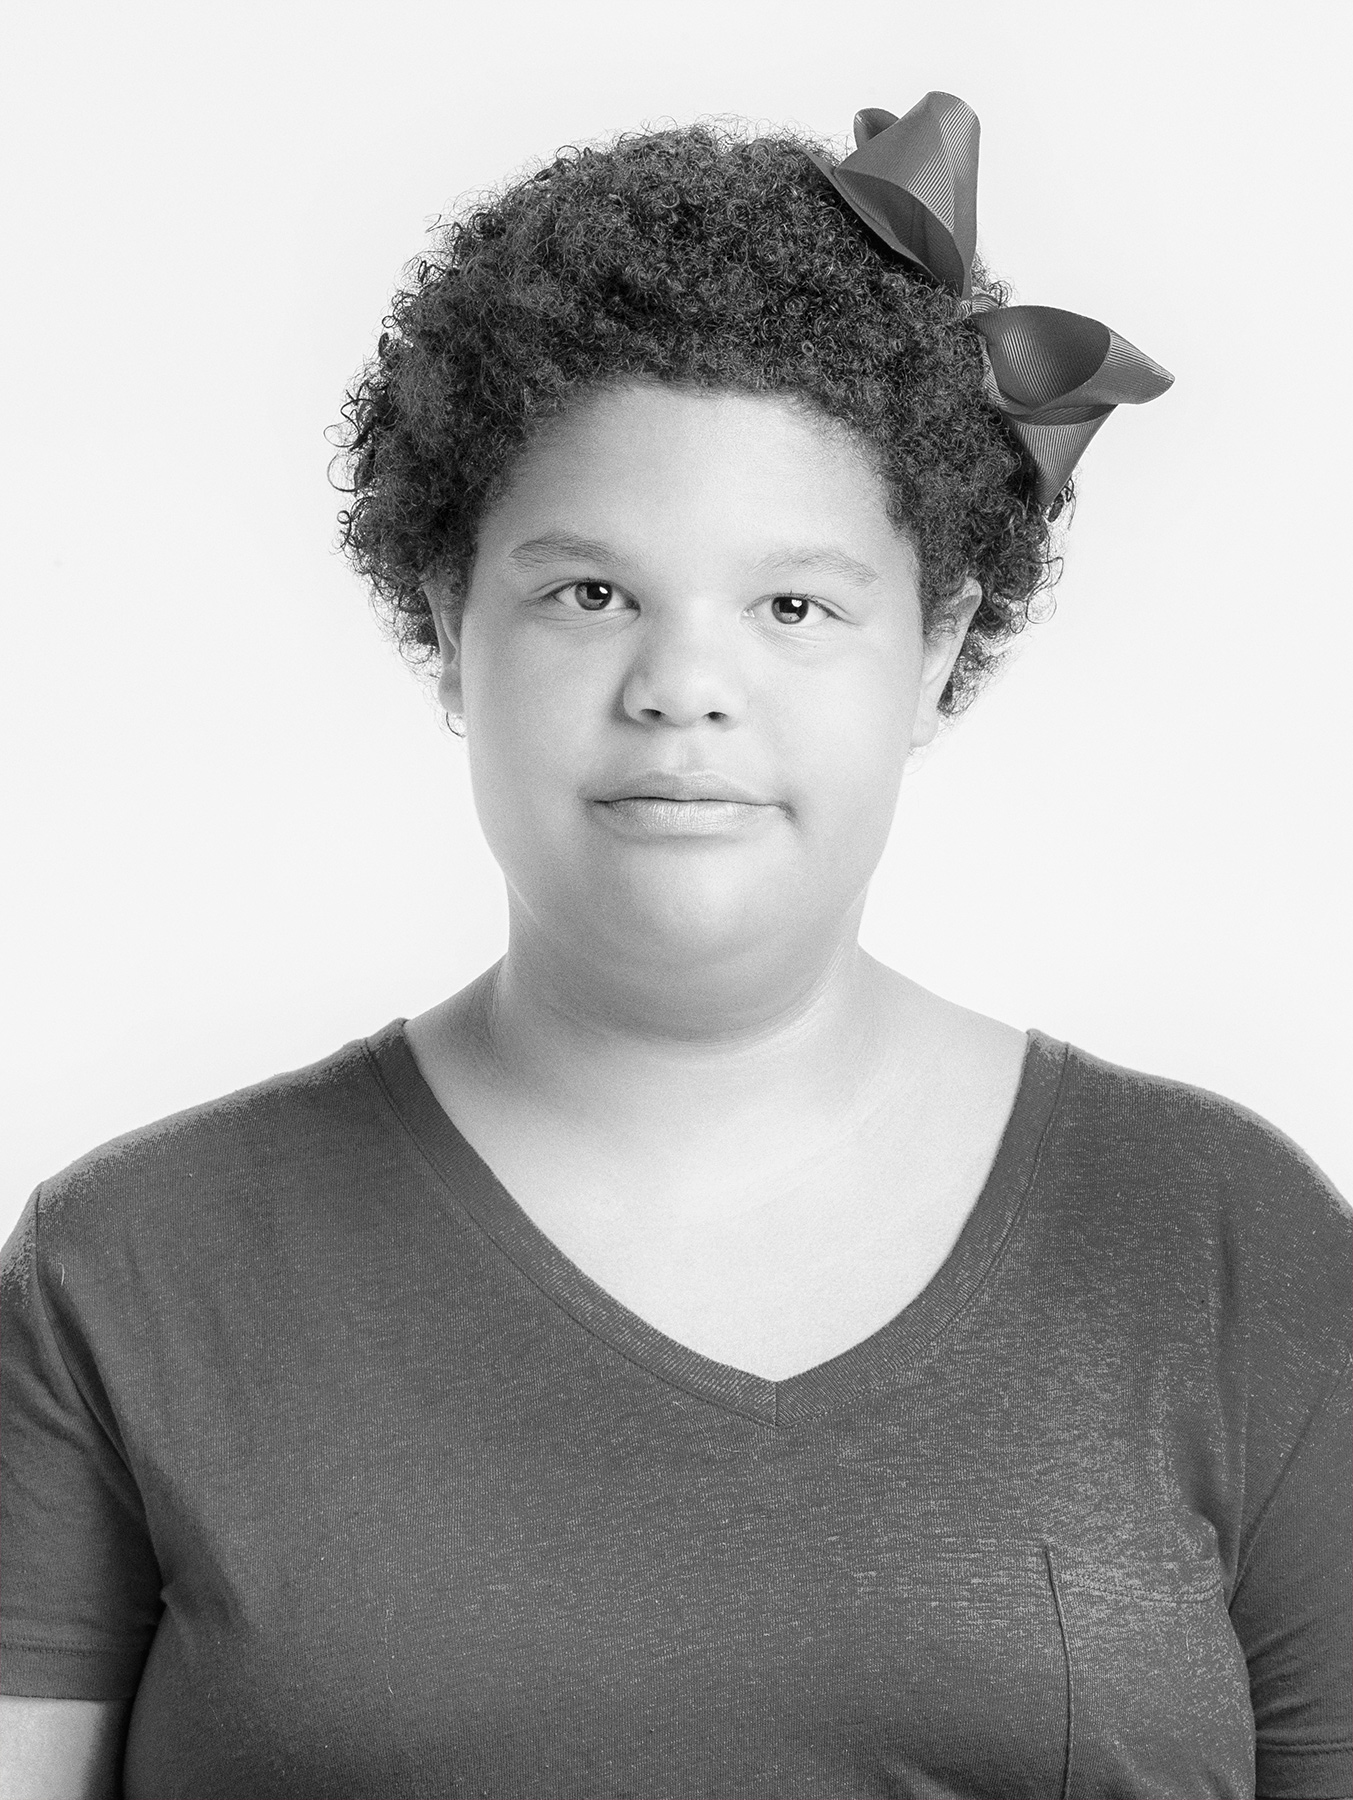  close up photography portrait of a young girl in black and white on a white background for Community Table